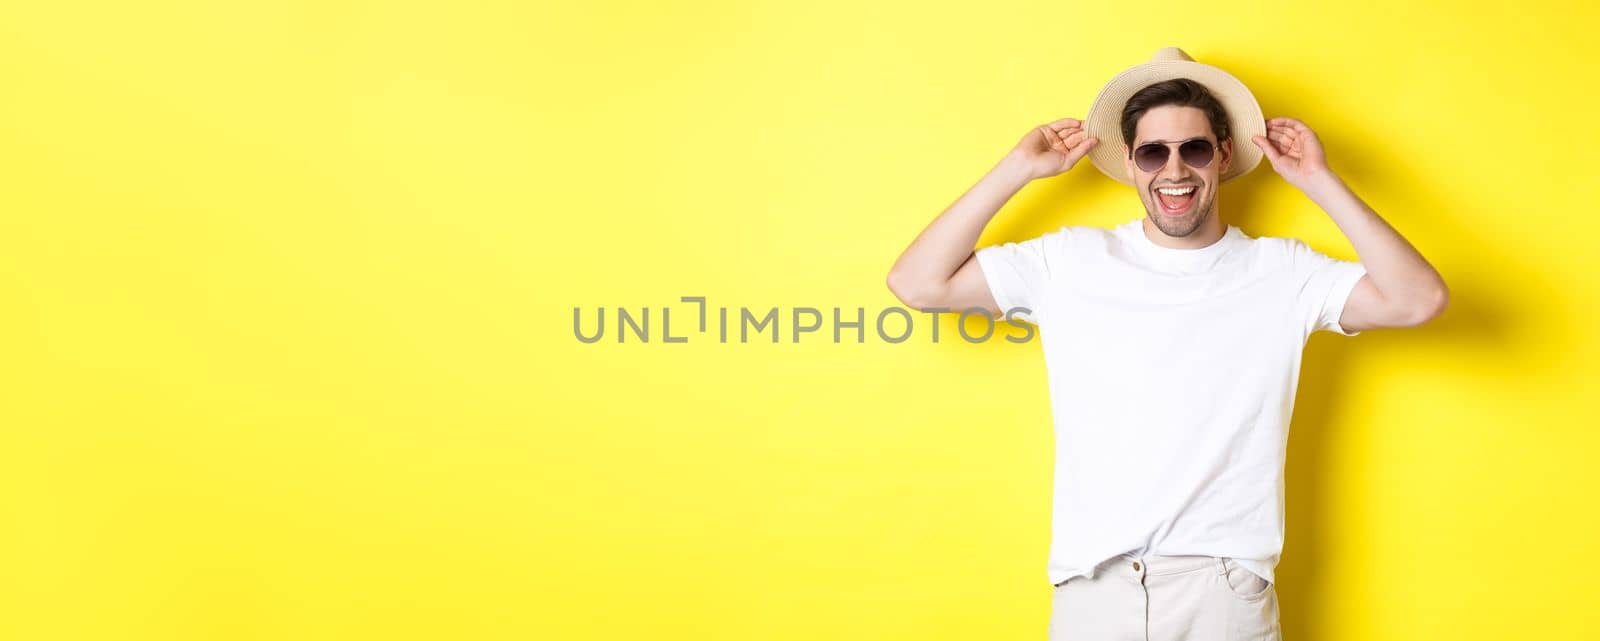 Happy man on vacation, wearing straw hat and sunglasses, smiling while standing against yellow background.